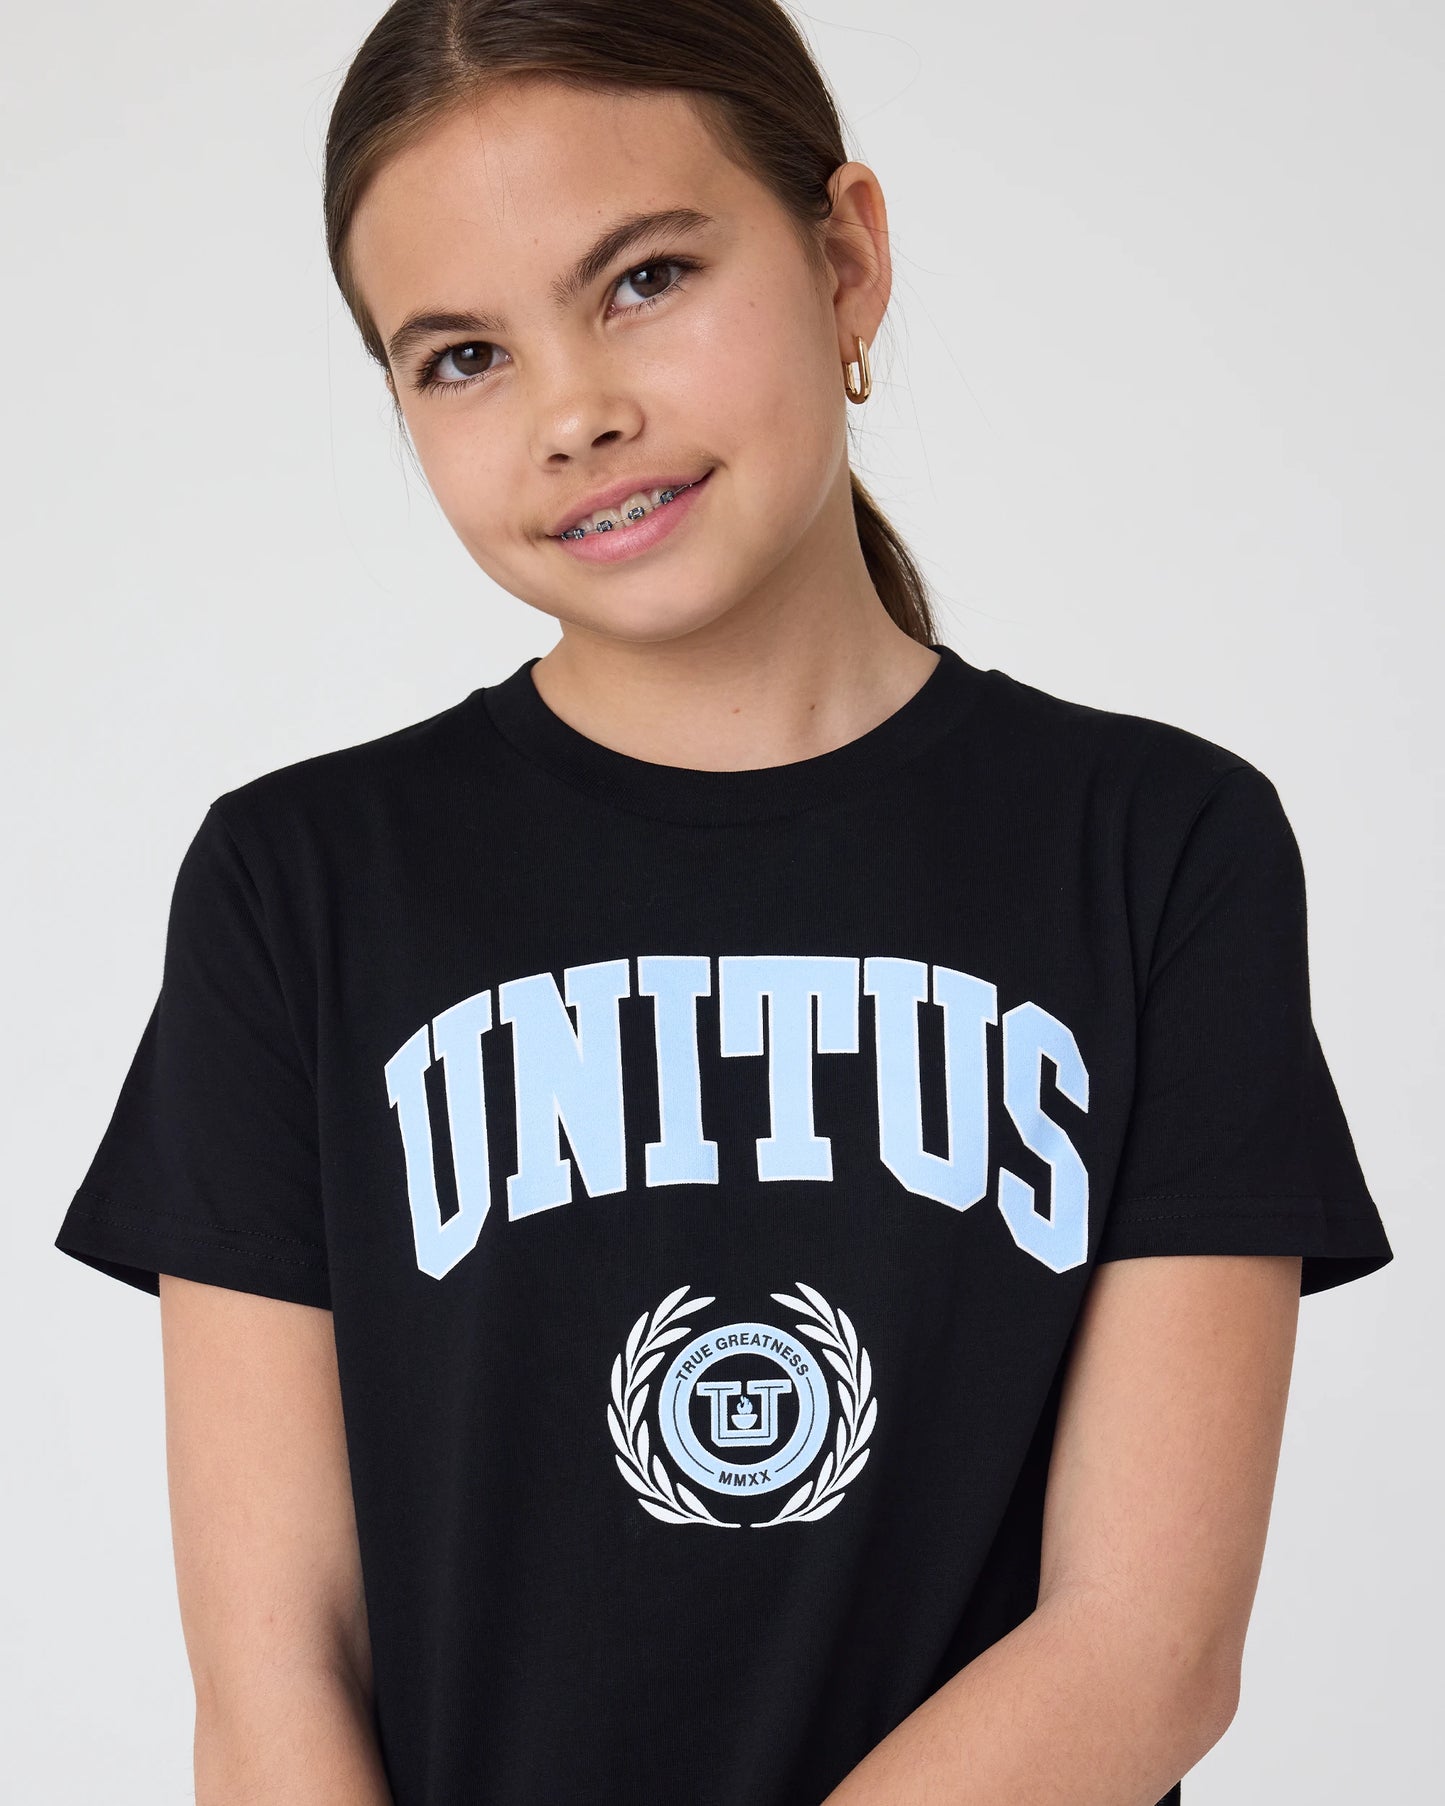 Youth Collegiate Tee